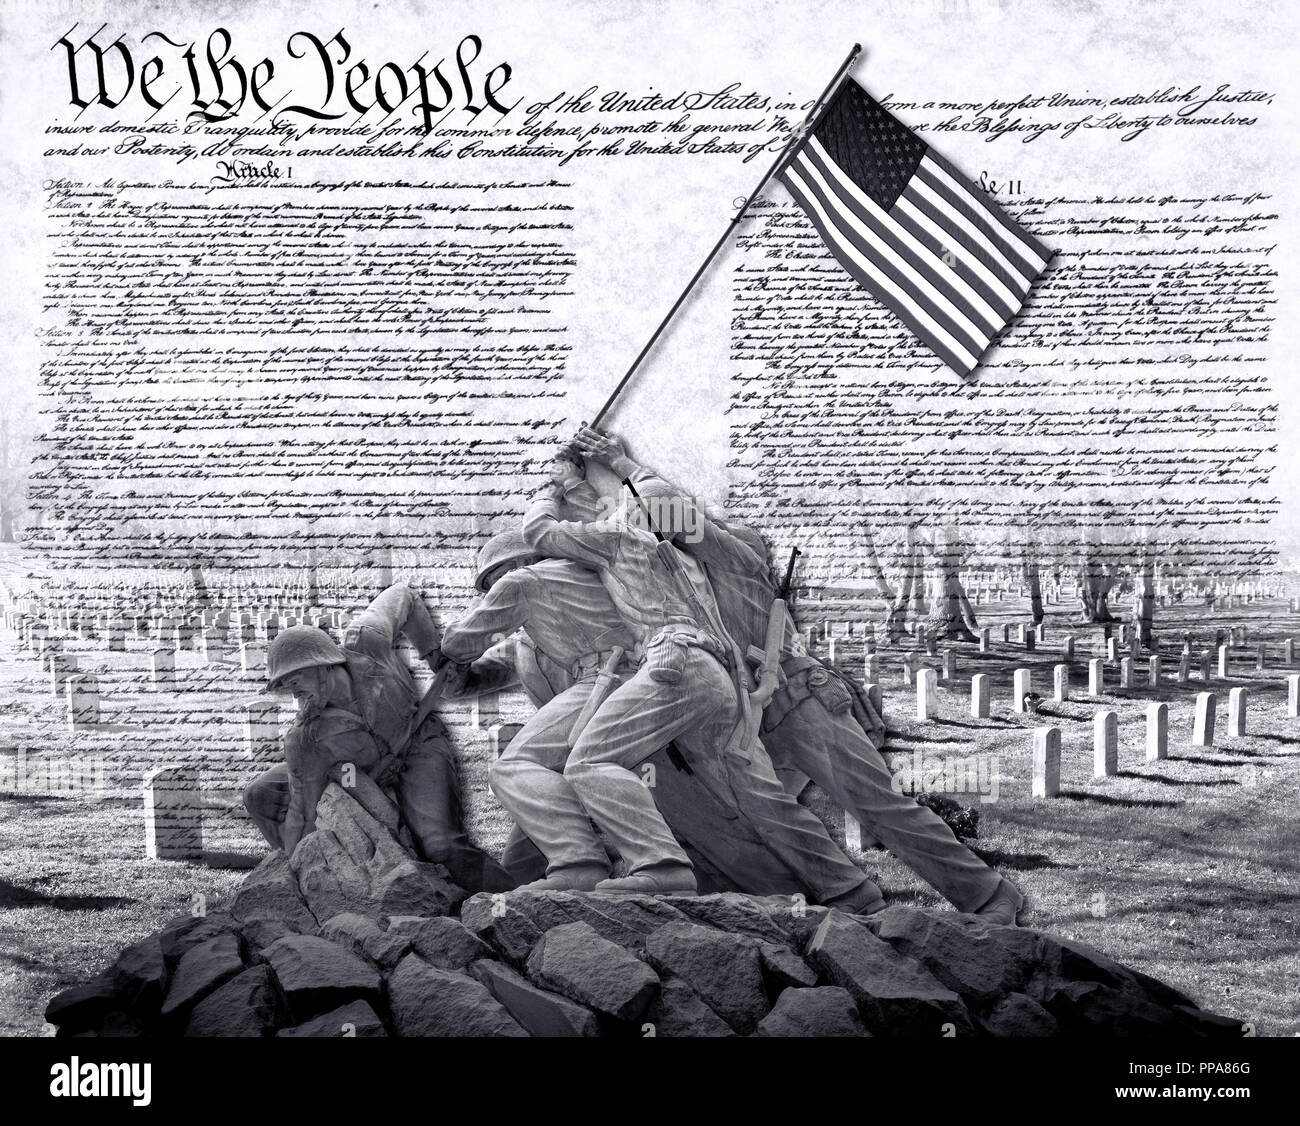 We the People and the American way in black and white. Stock Photo